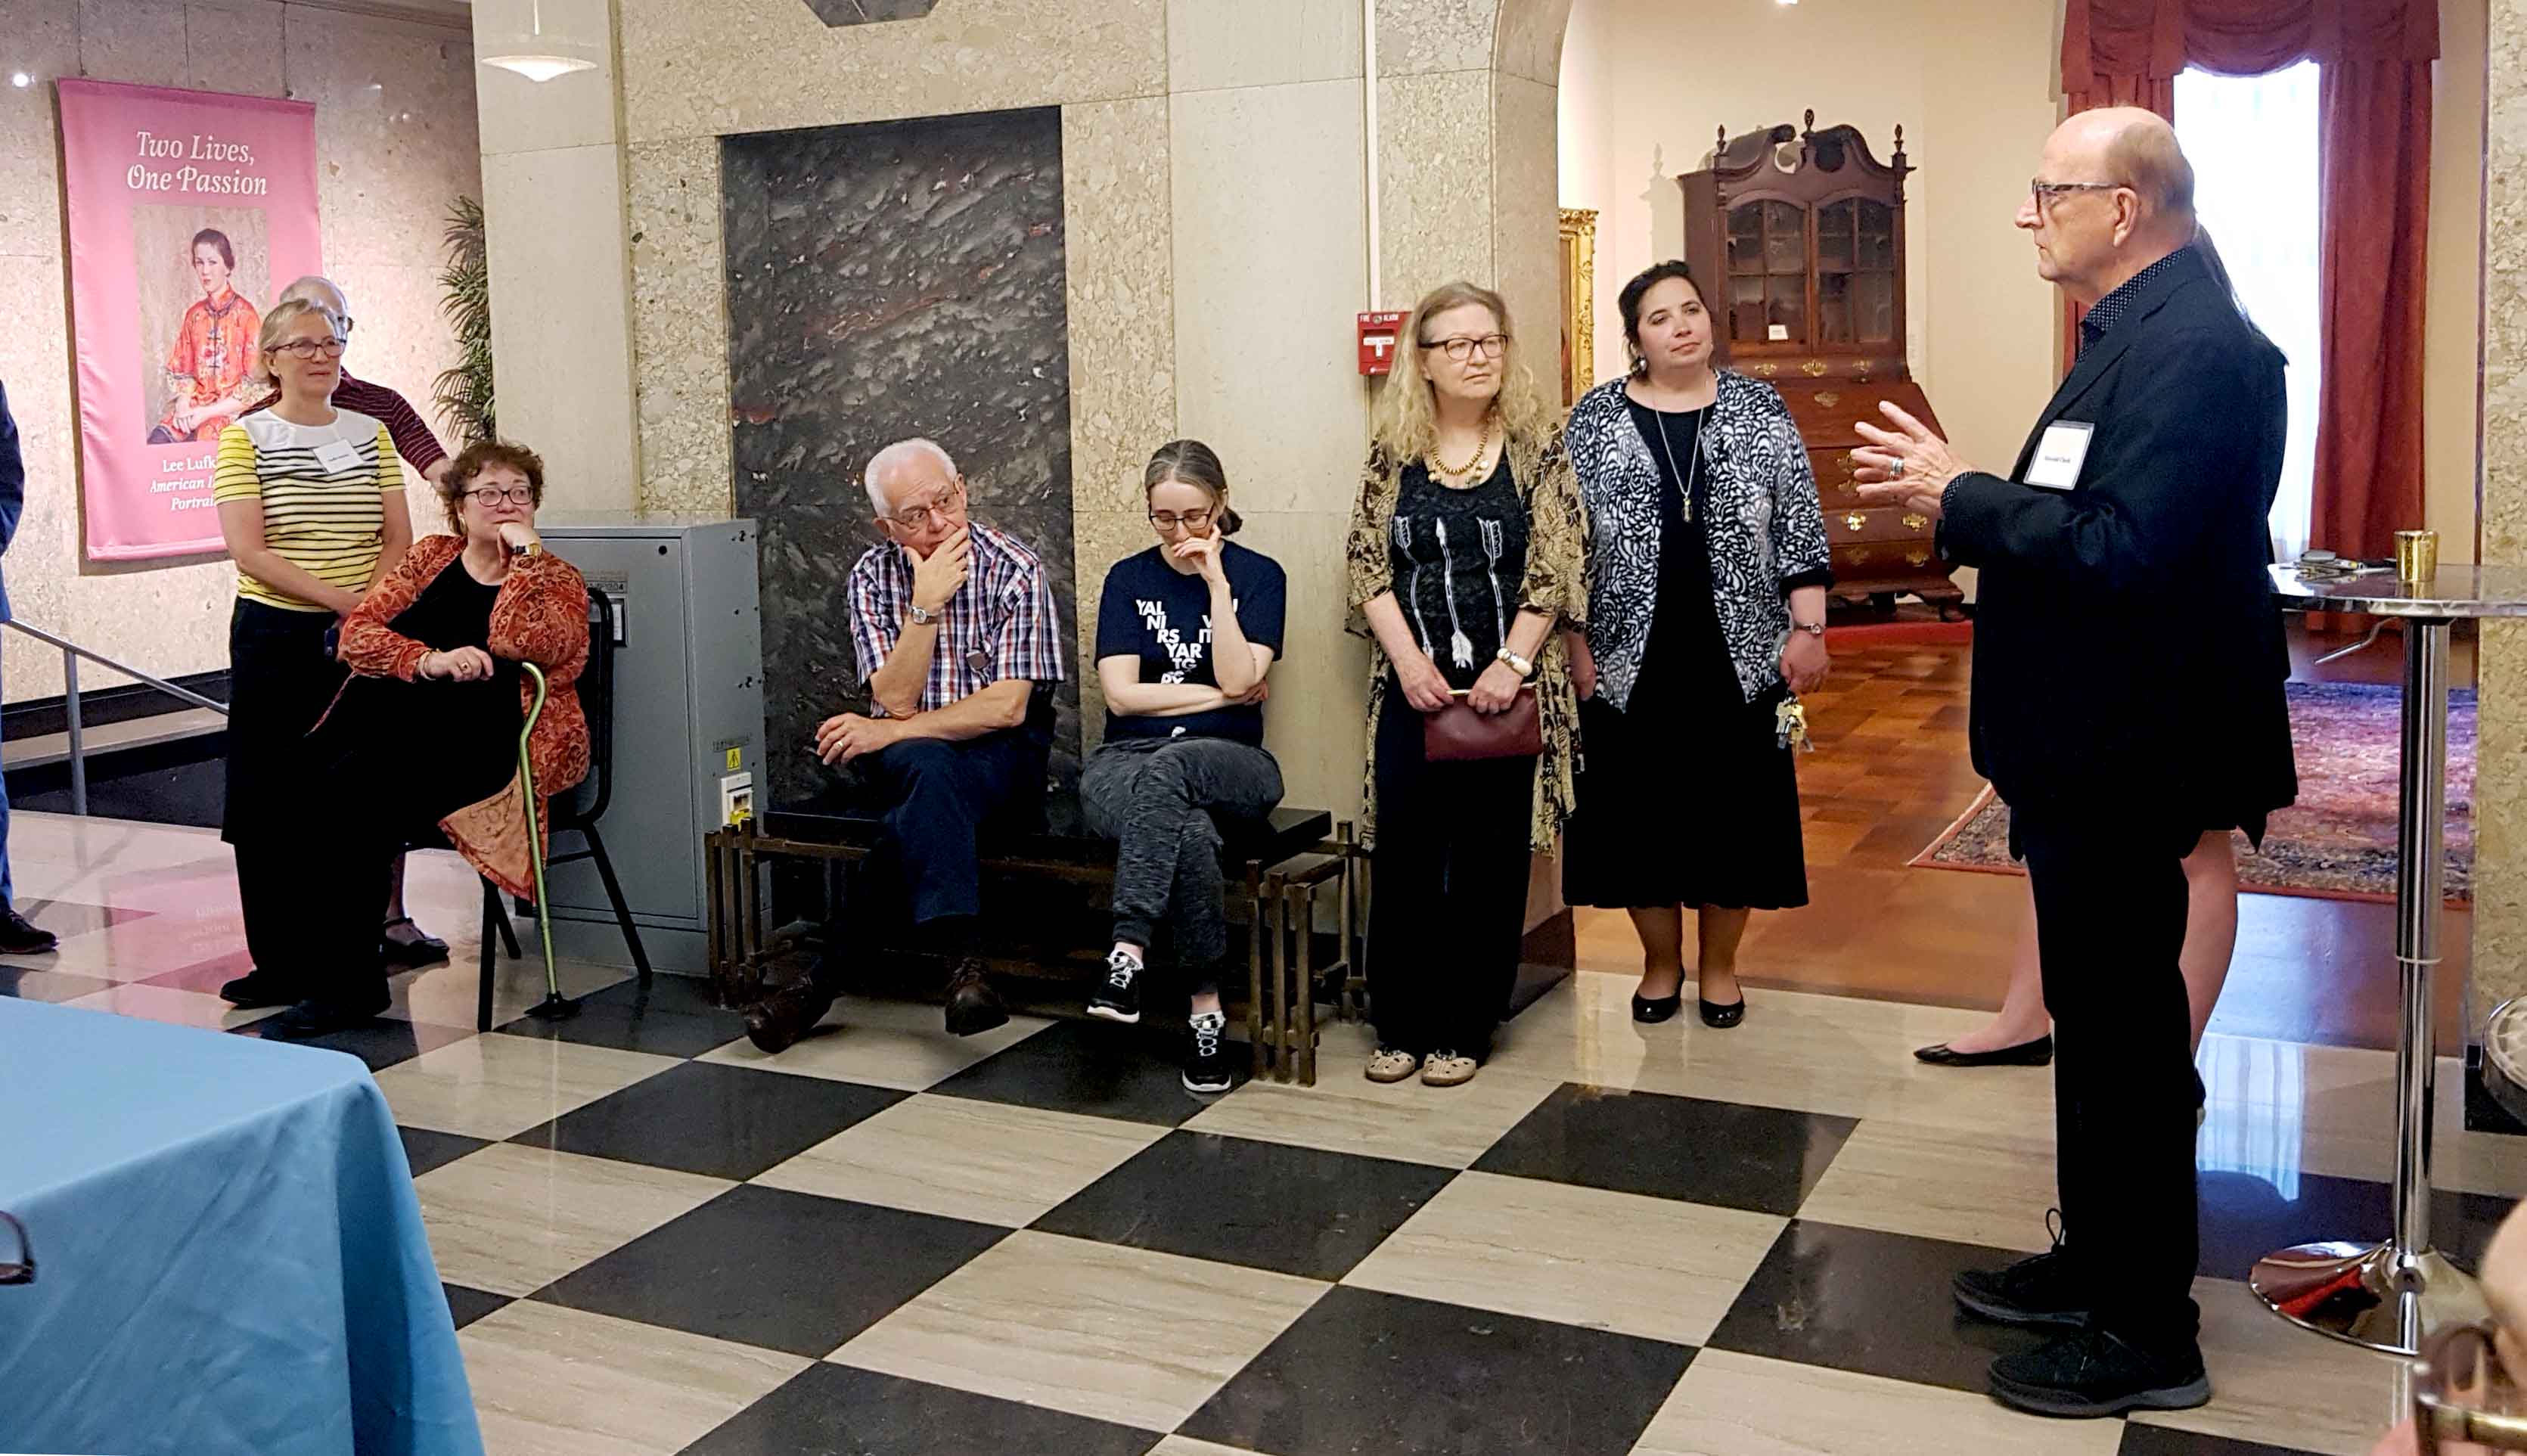 Donald Clark, right, speaks at the opening of an exhibition of his collection at The Springfield Museums, June 2018.